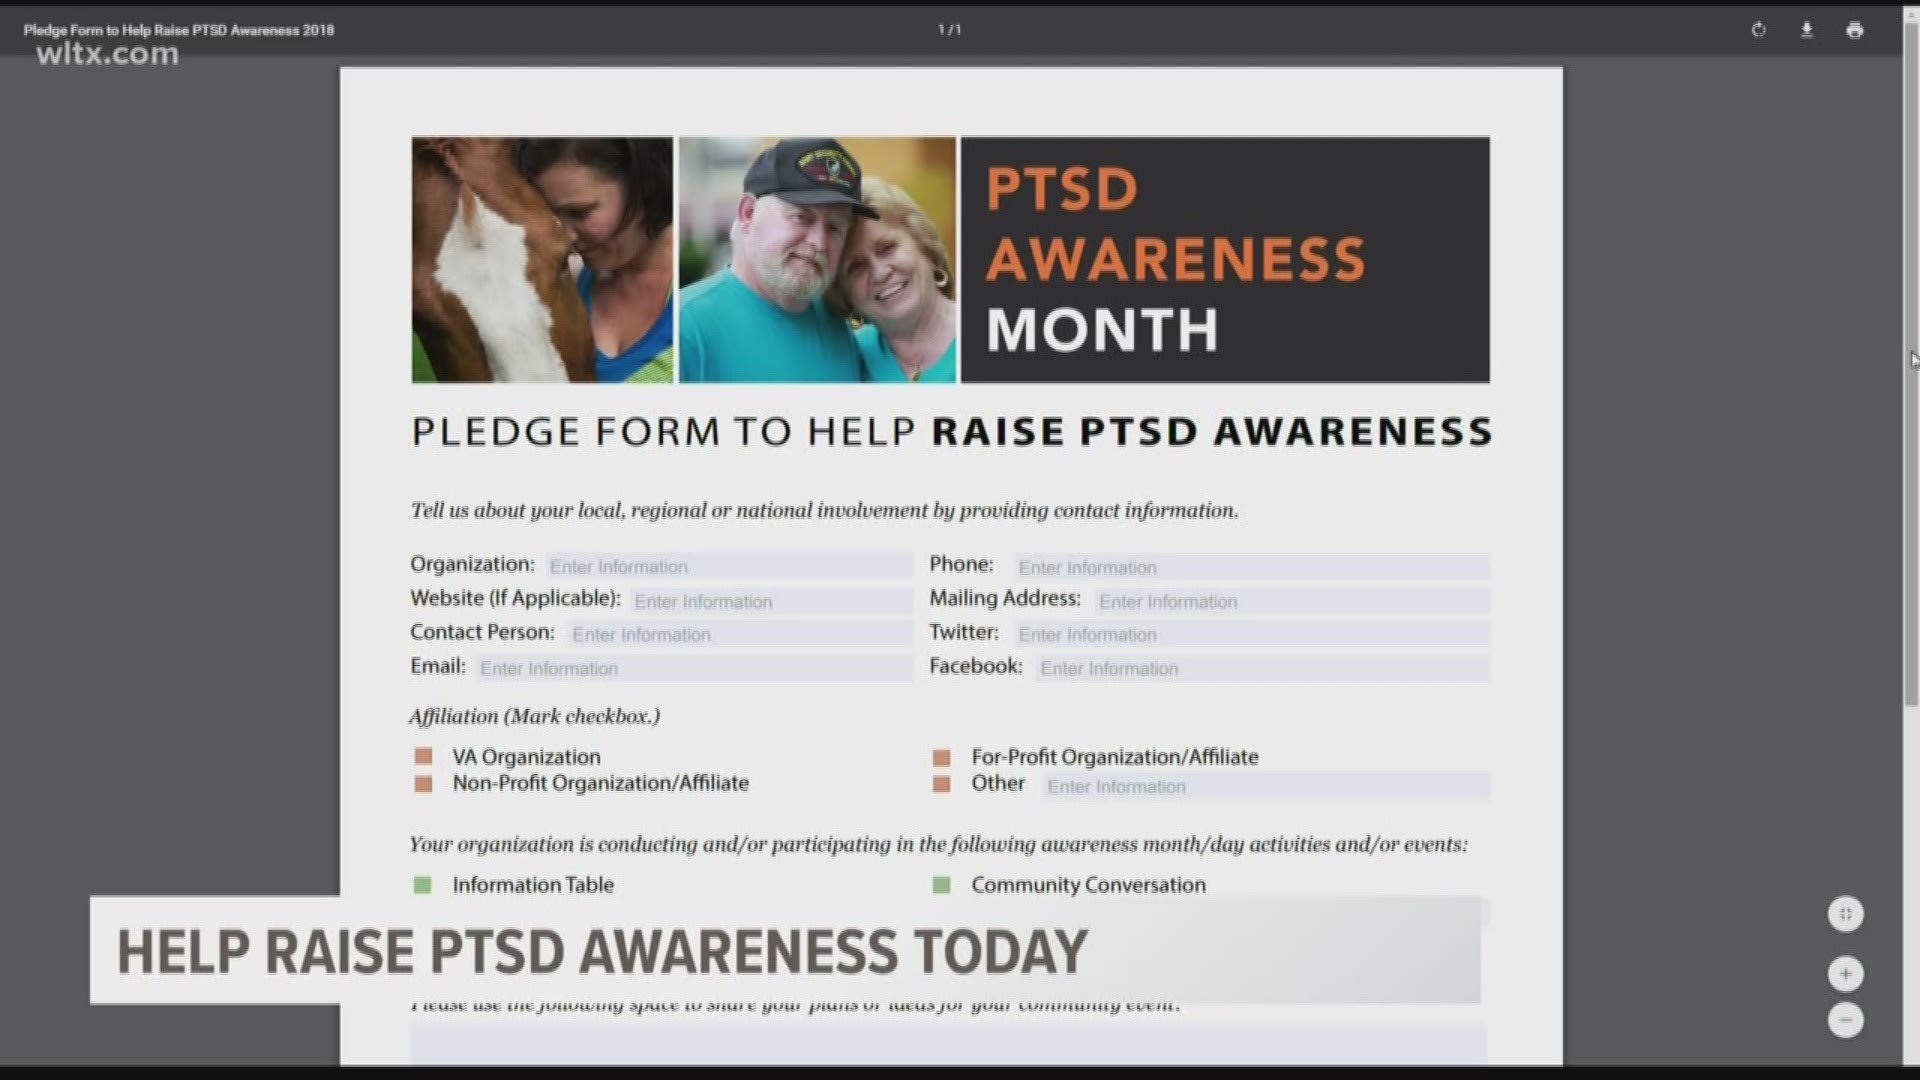 The Department of Veterans Affairs reports about 8 million people have post traumatic stress disorder.